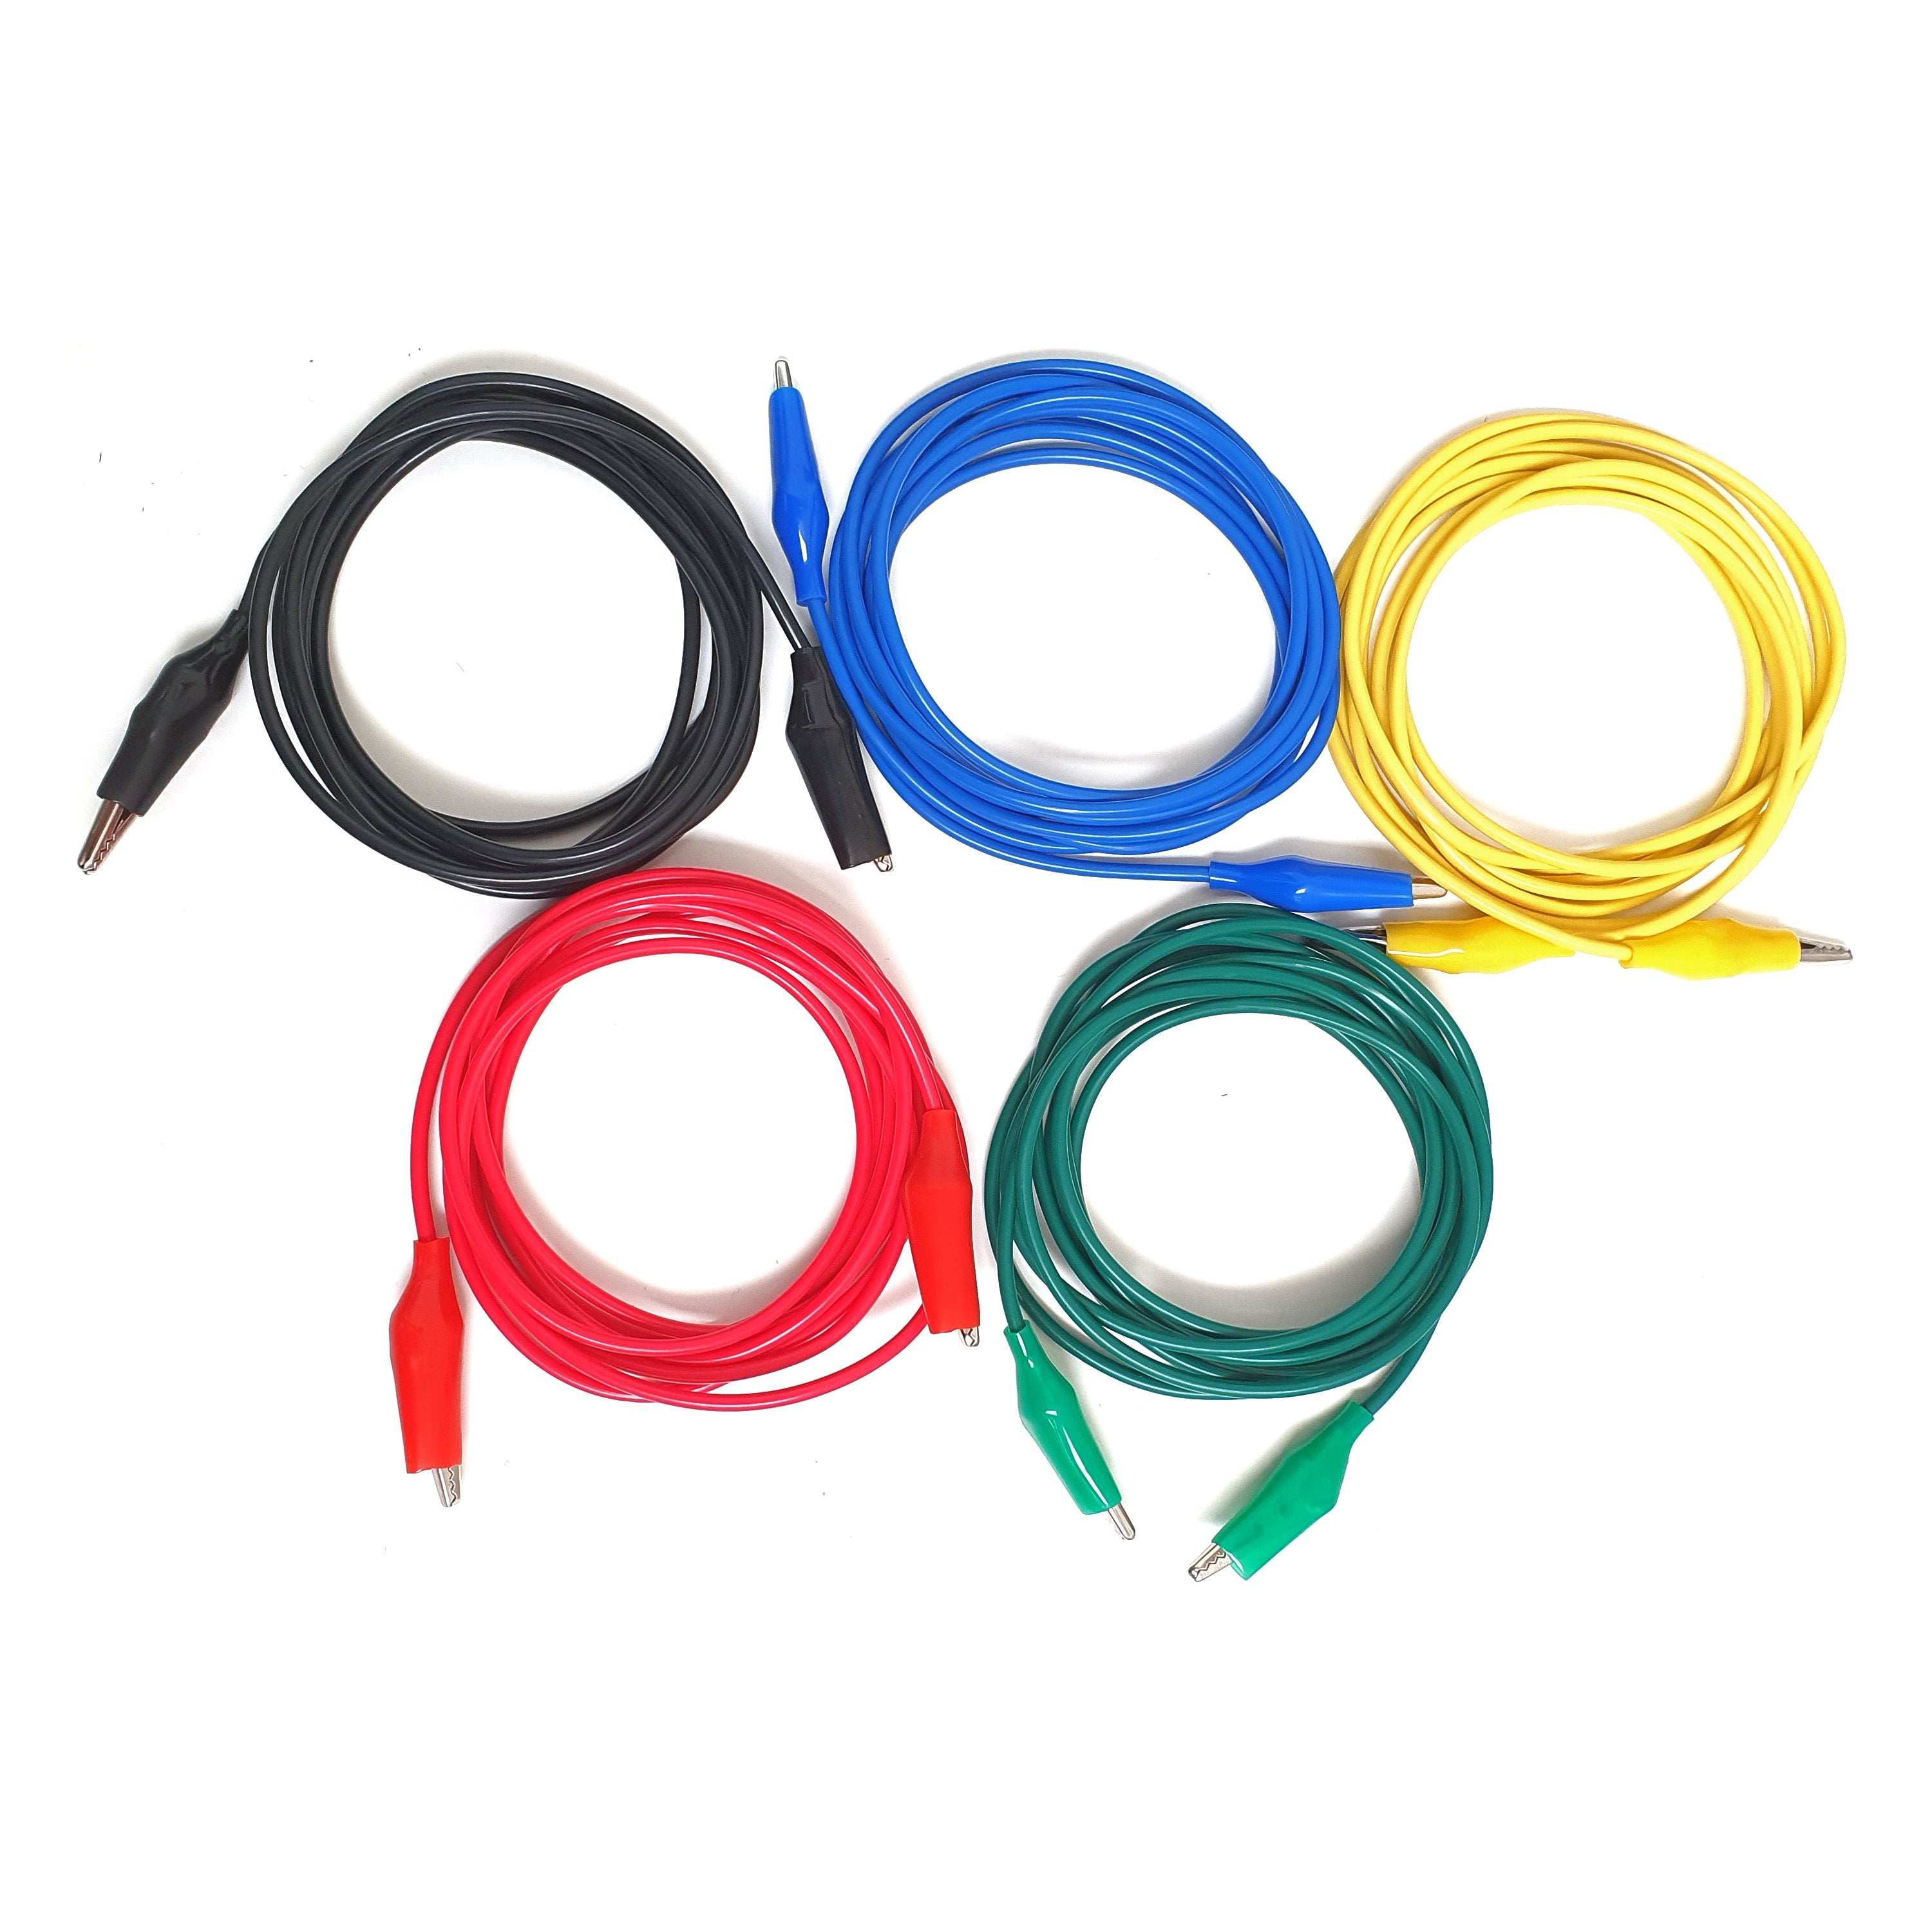 5pc Crocodile/Aligator Test Leads With Clips 2m long extra Flexible soldered connectors